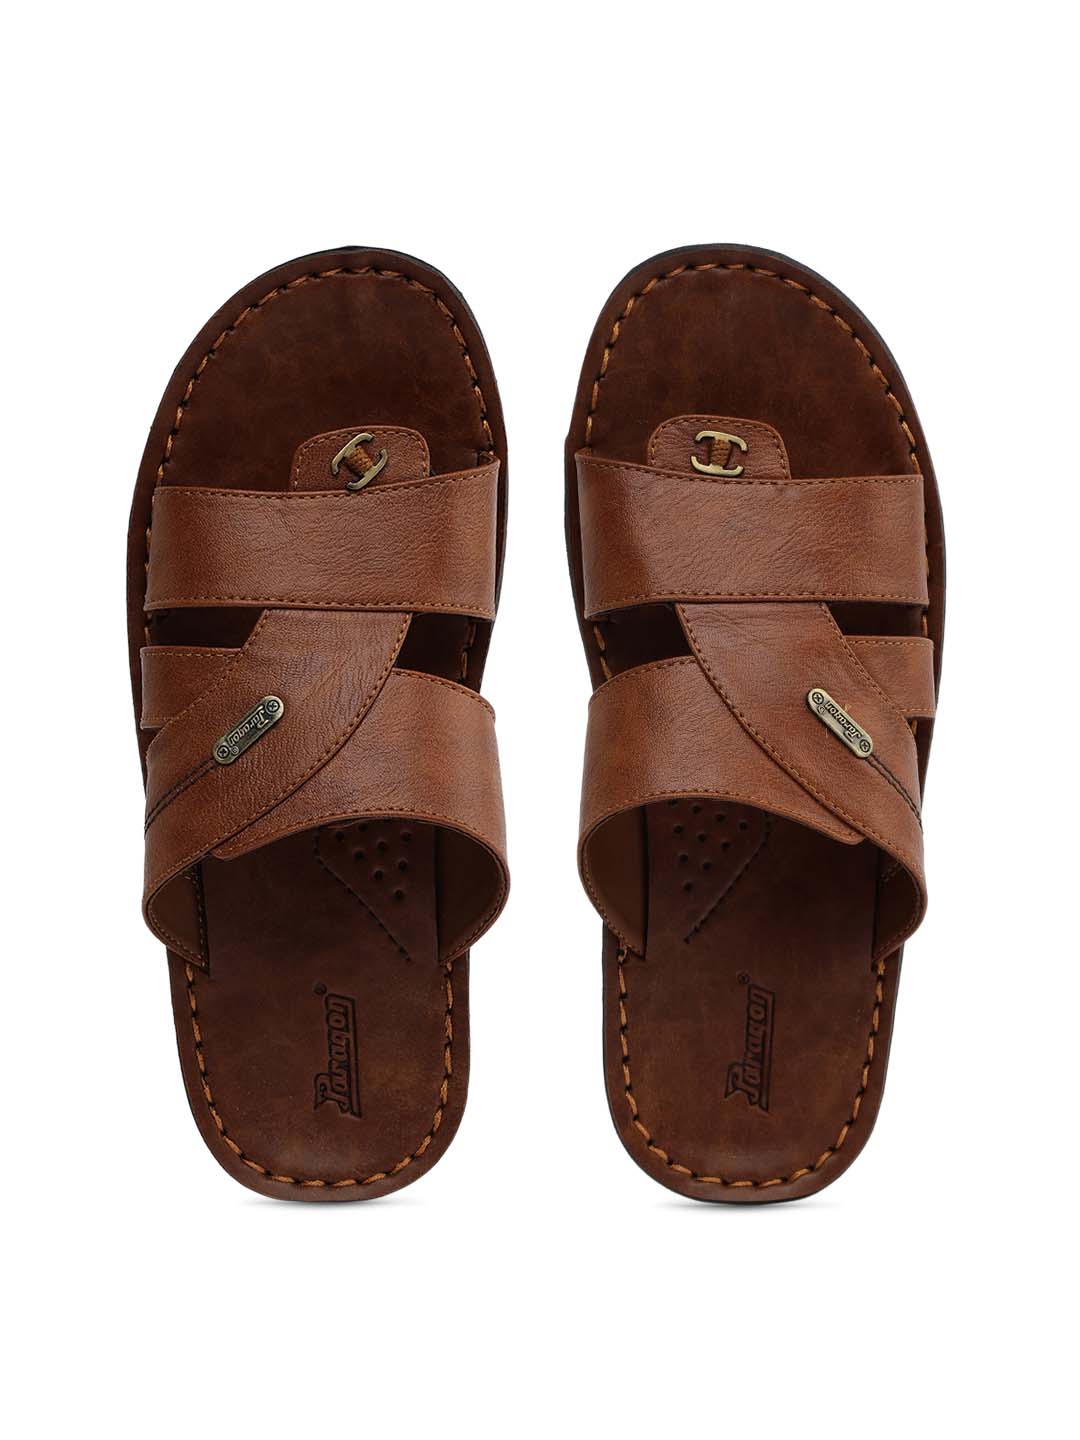 Paragon PU6220G Men Stylish Sandals | Comfortable Sandals for Daily Outdoor Use | Casual Formal Sandals with Cushioned Soles